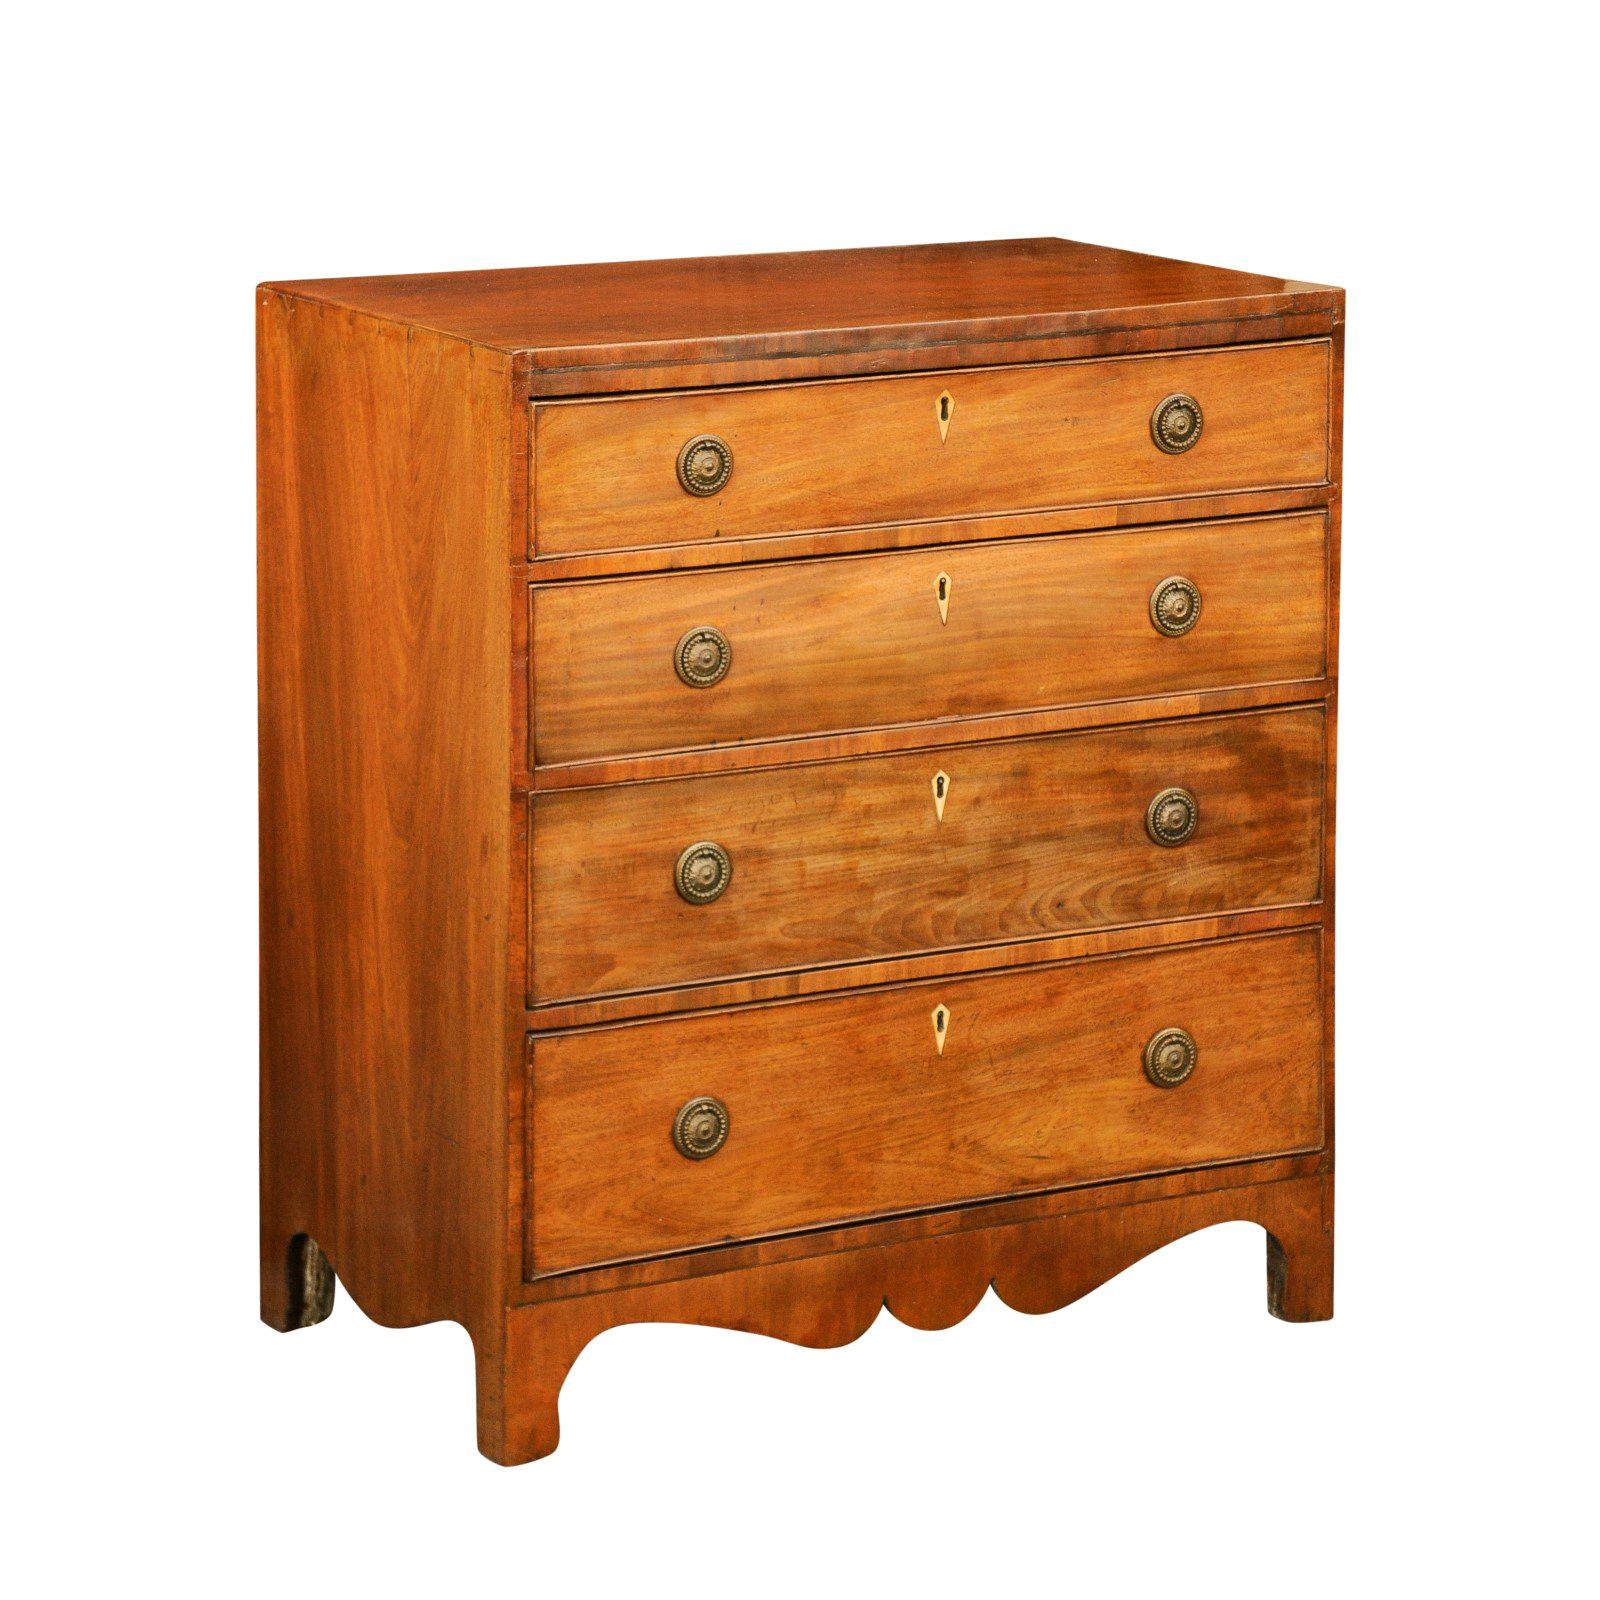 English 1860s Mahogany Commode with Graduated Drawers and Scalloped Apron